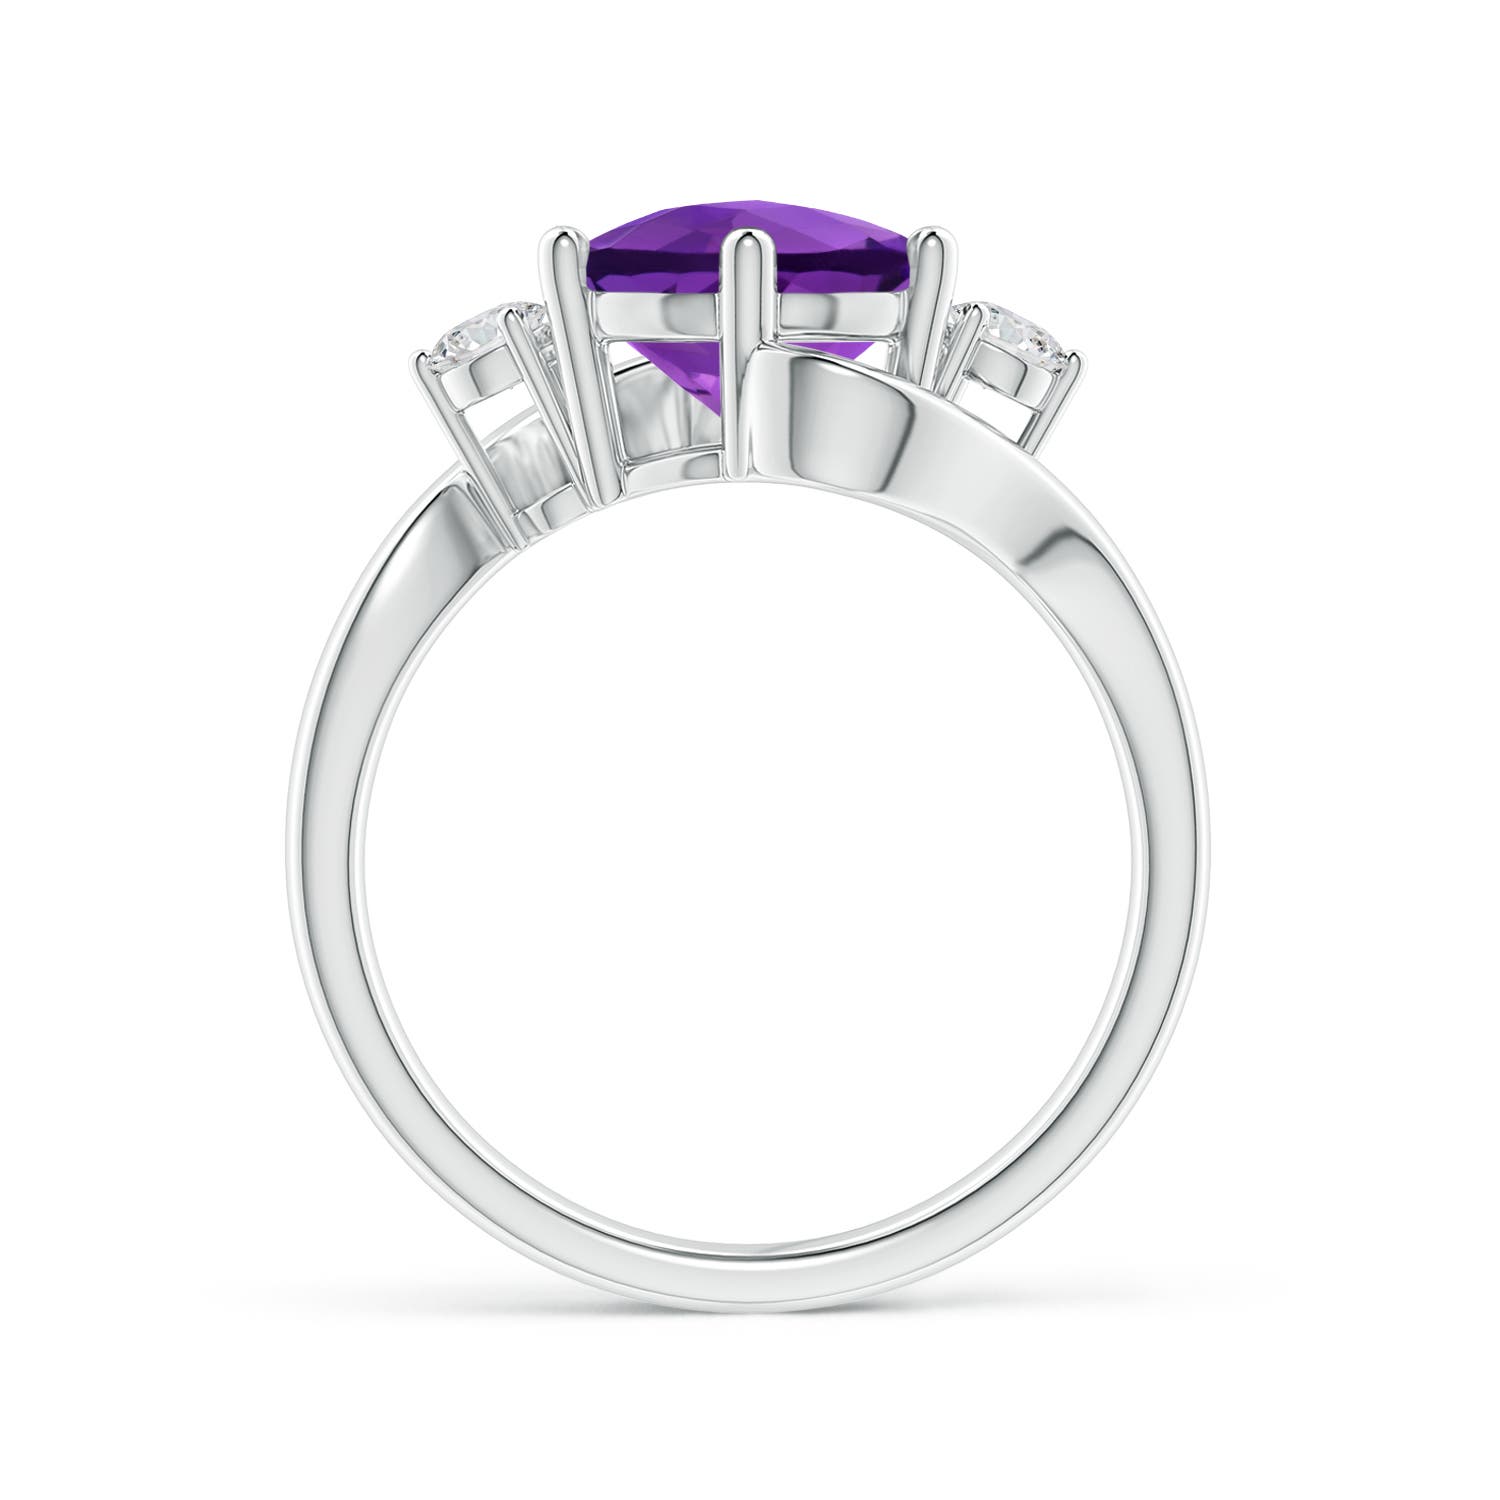 AAA - Amethyst / 2.31 CT / 14 KT White Gold